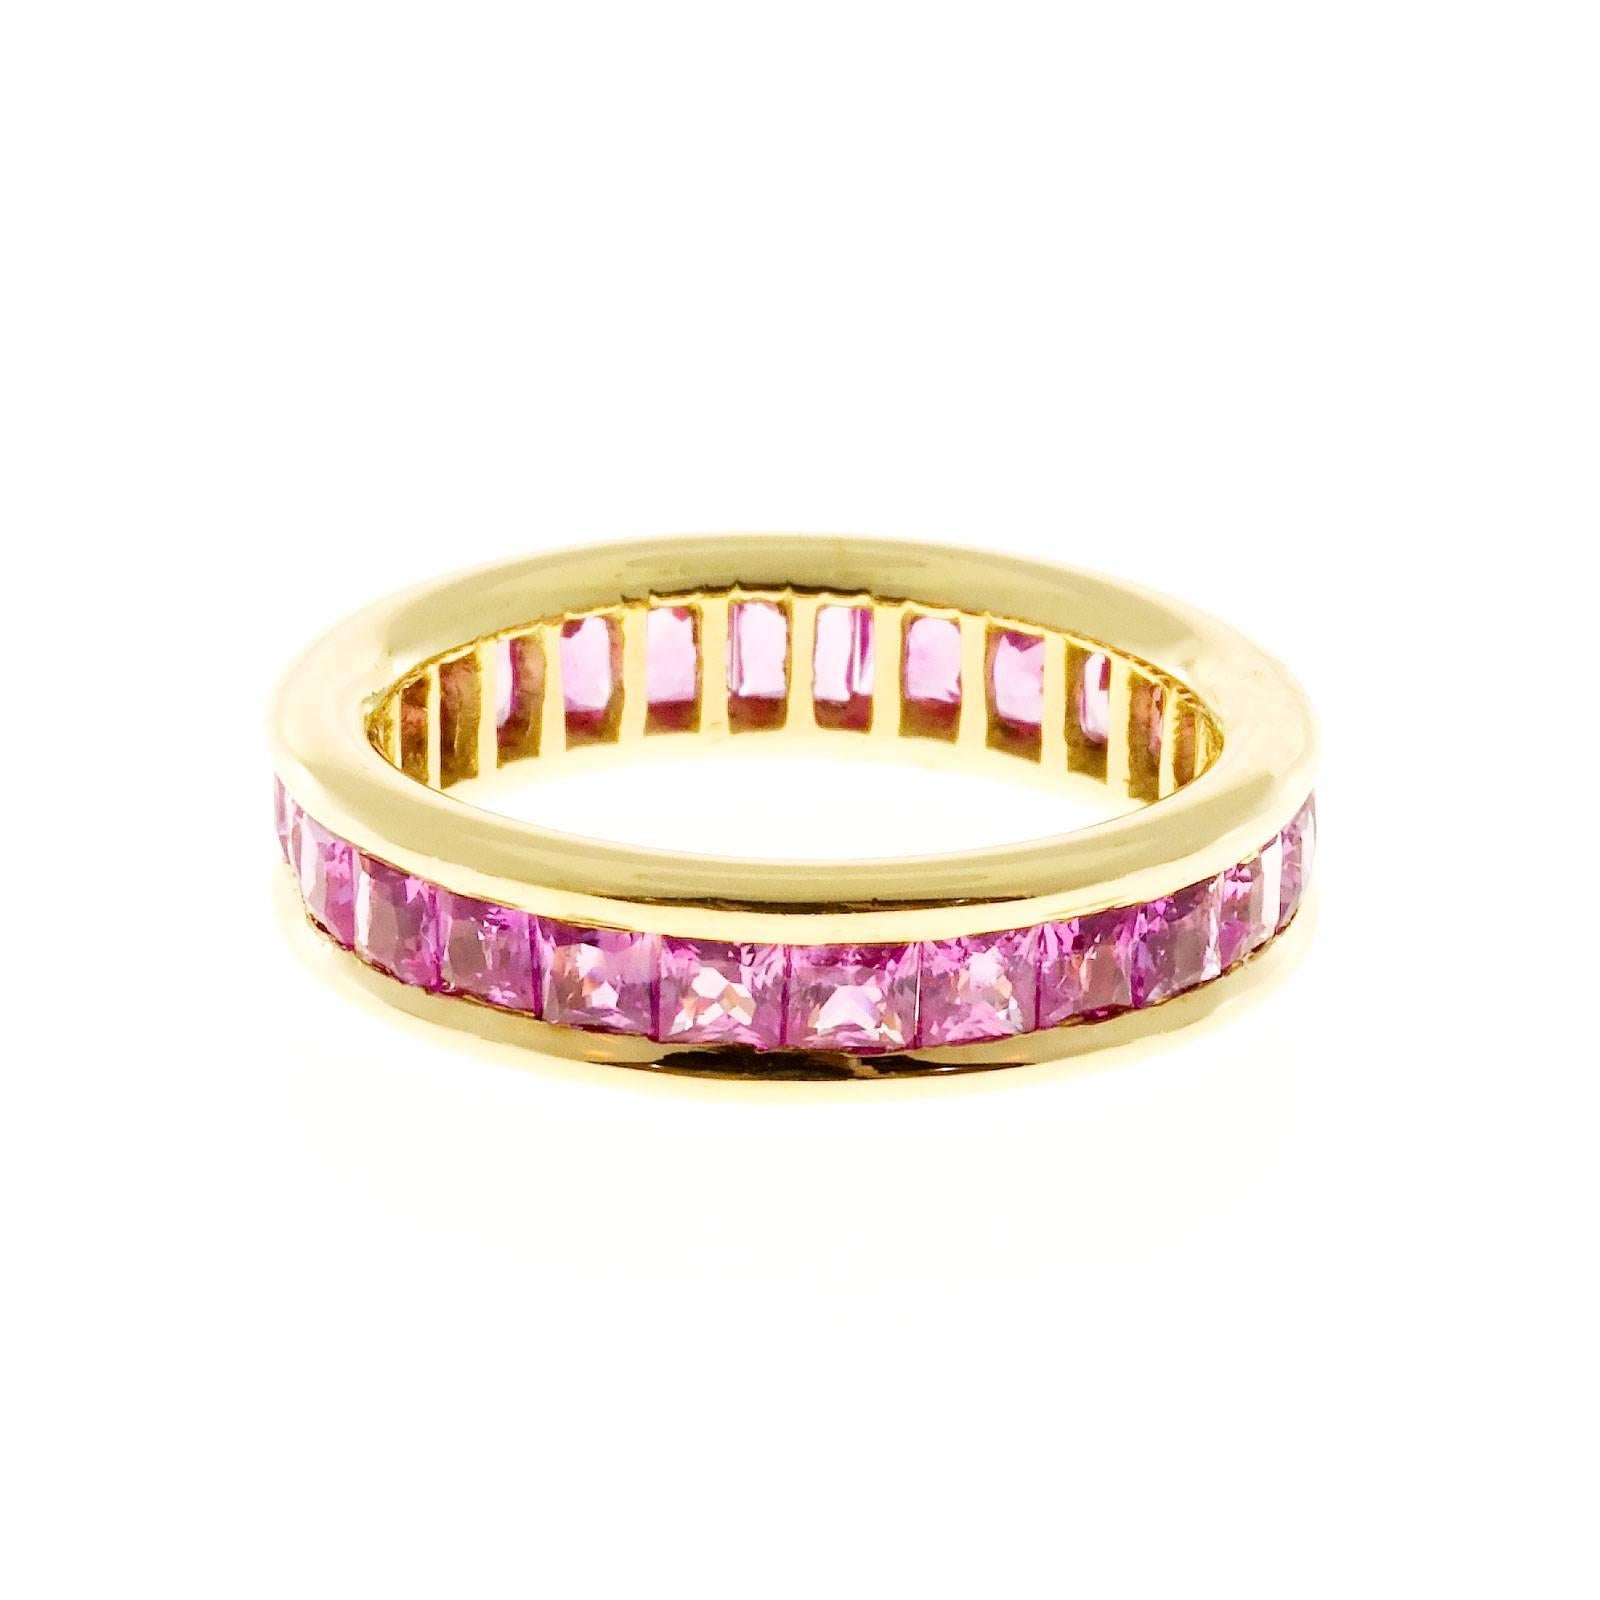 3.75 Carat Princess Cut Pink Sapphire Gold Eternity Band Ring For Sale ...